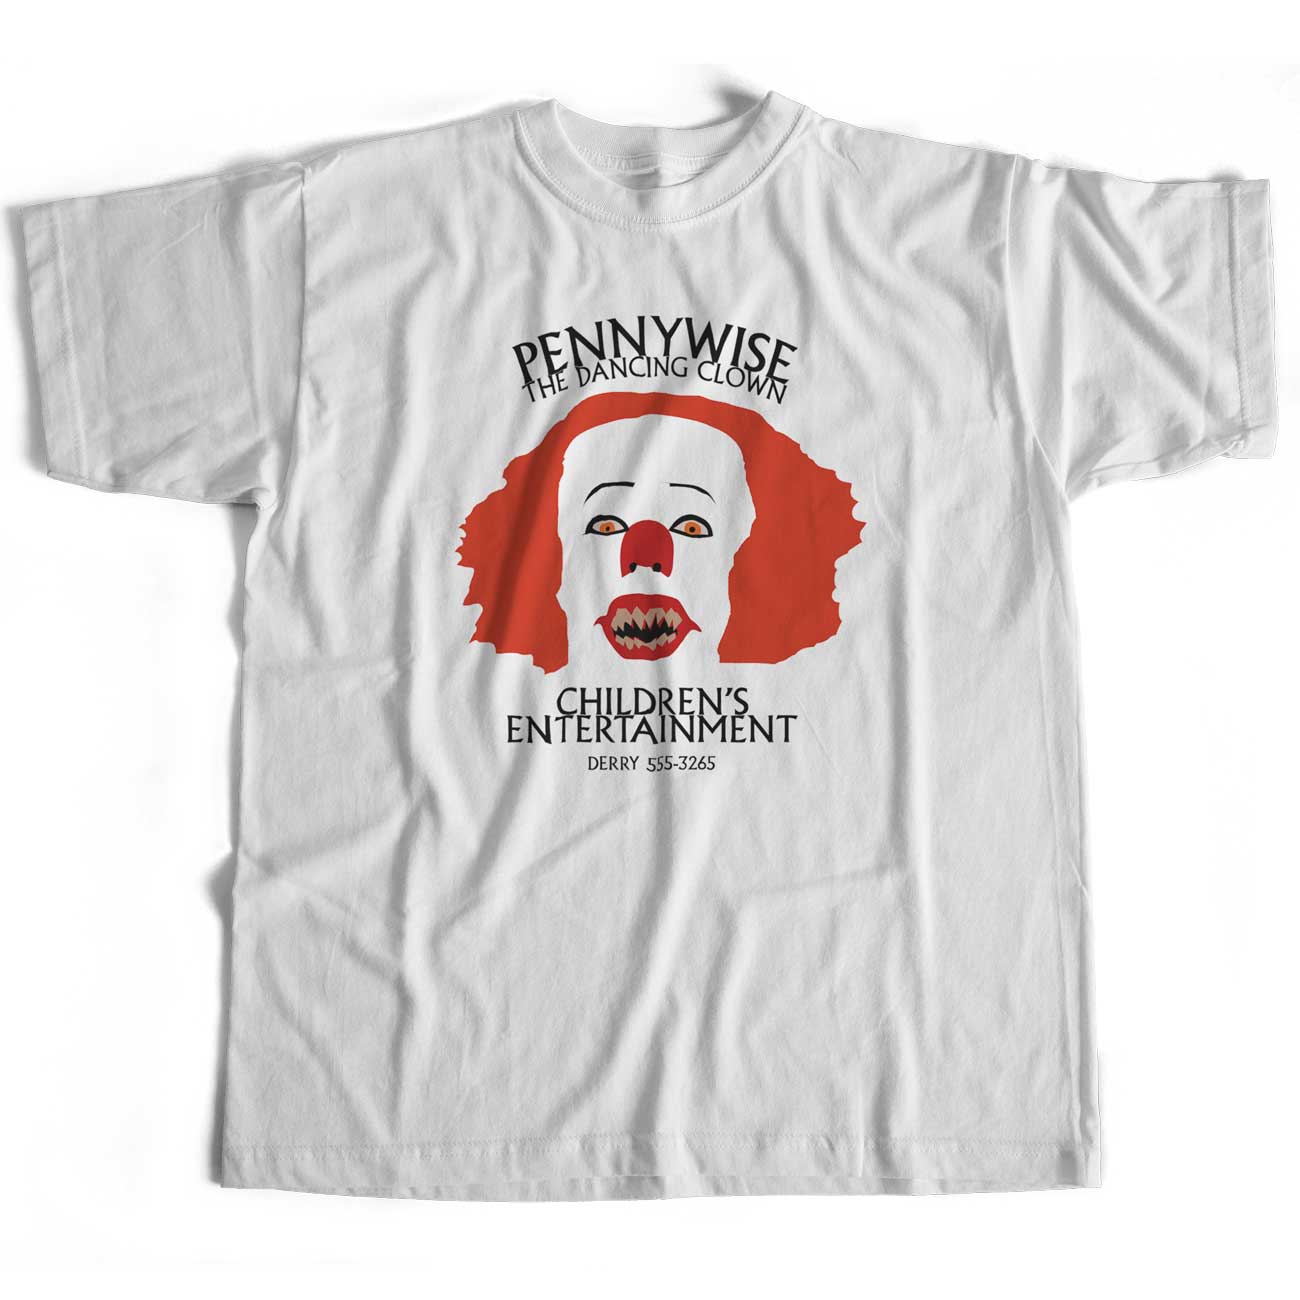 Pennywise The Clown T Shirt - Pennywise Children's Entertainment